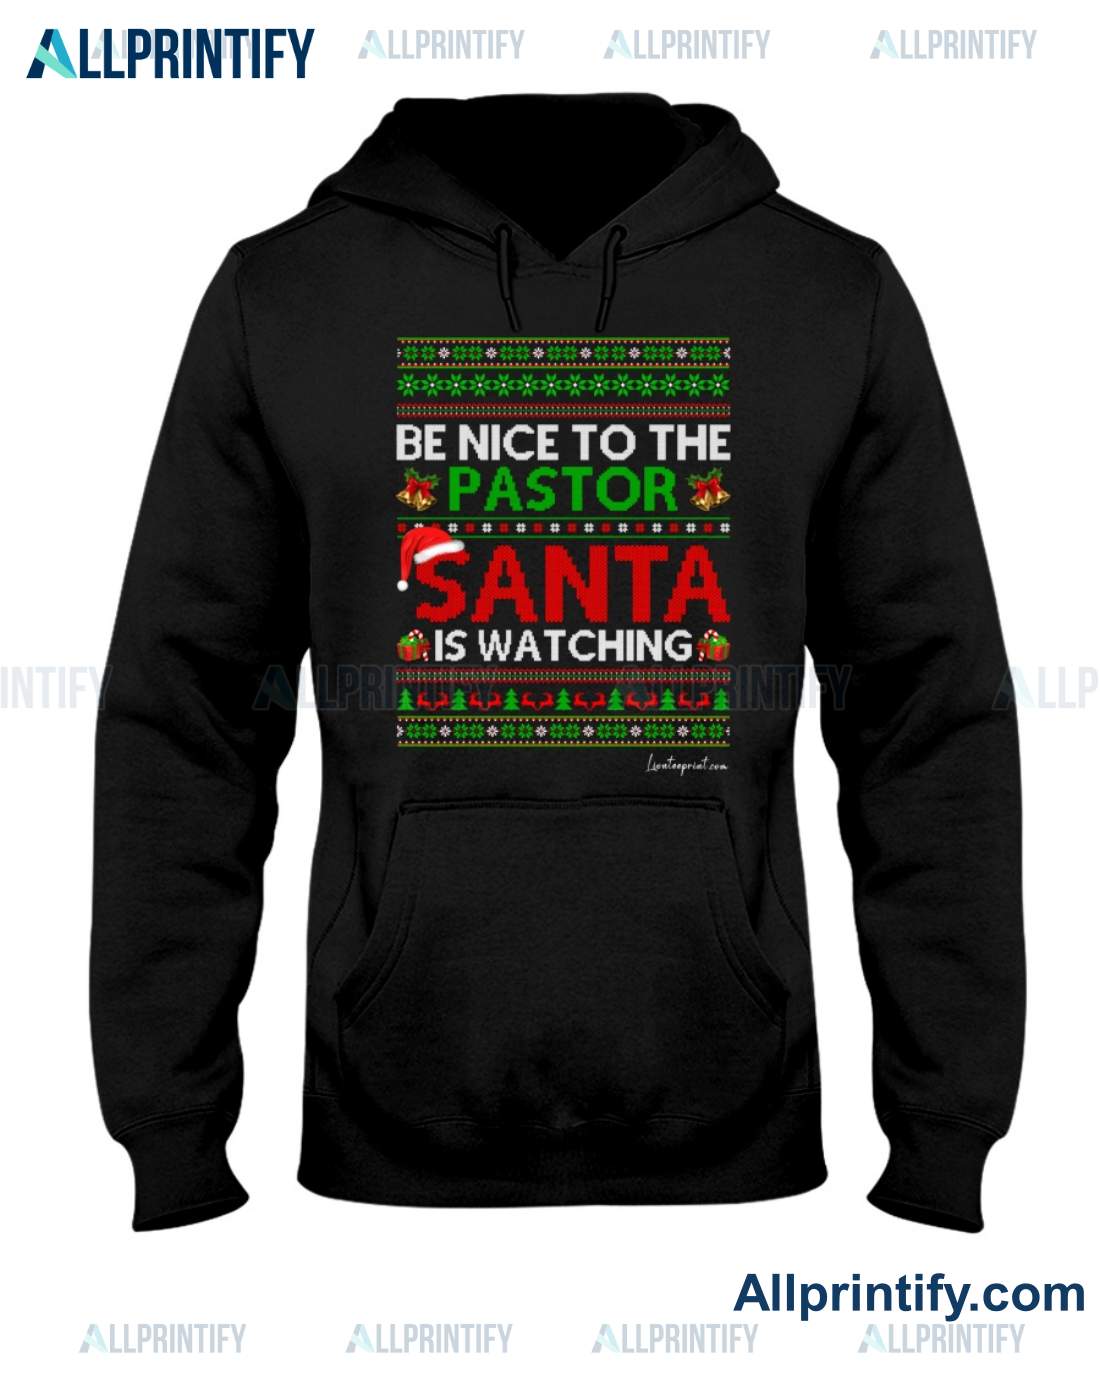 Be Nice To The Pastor Santa Is Watching Shirt a